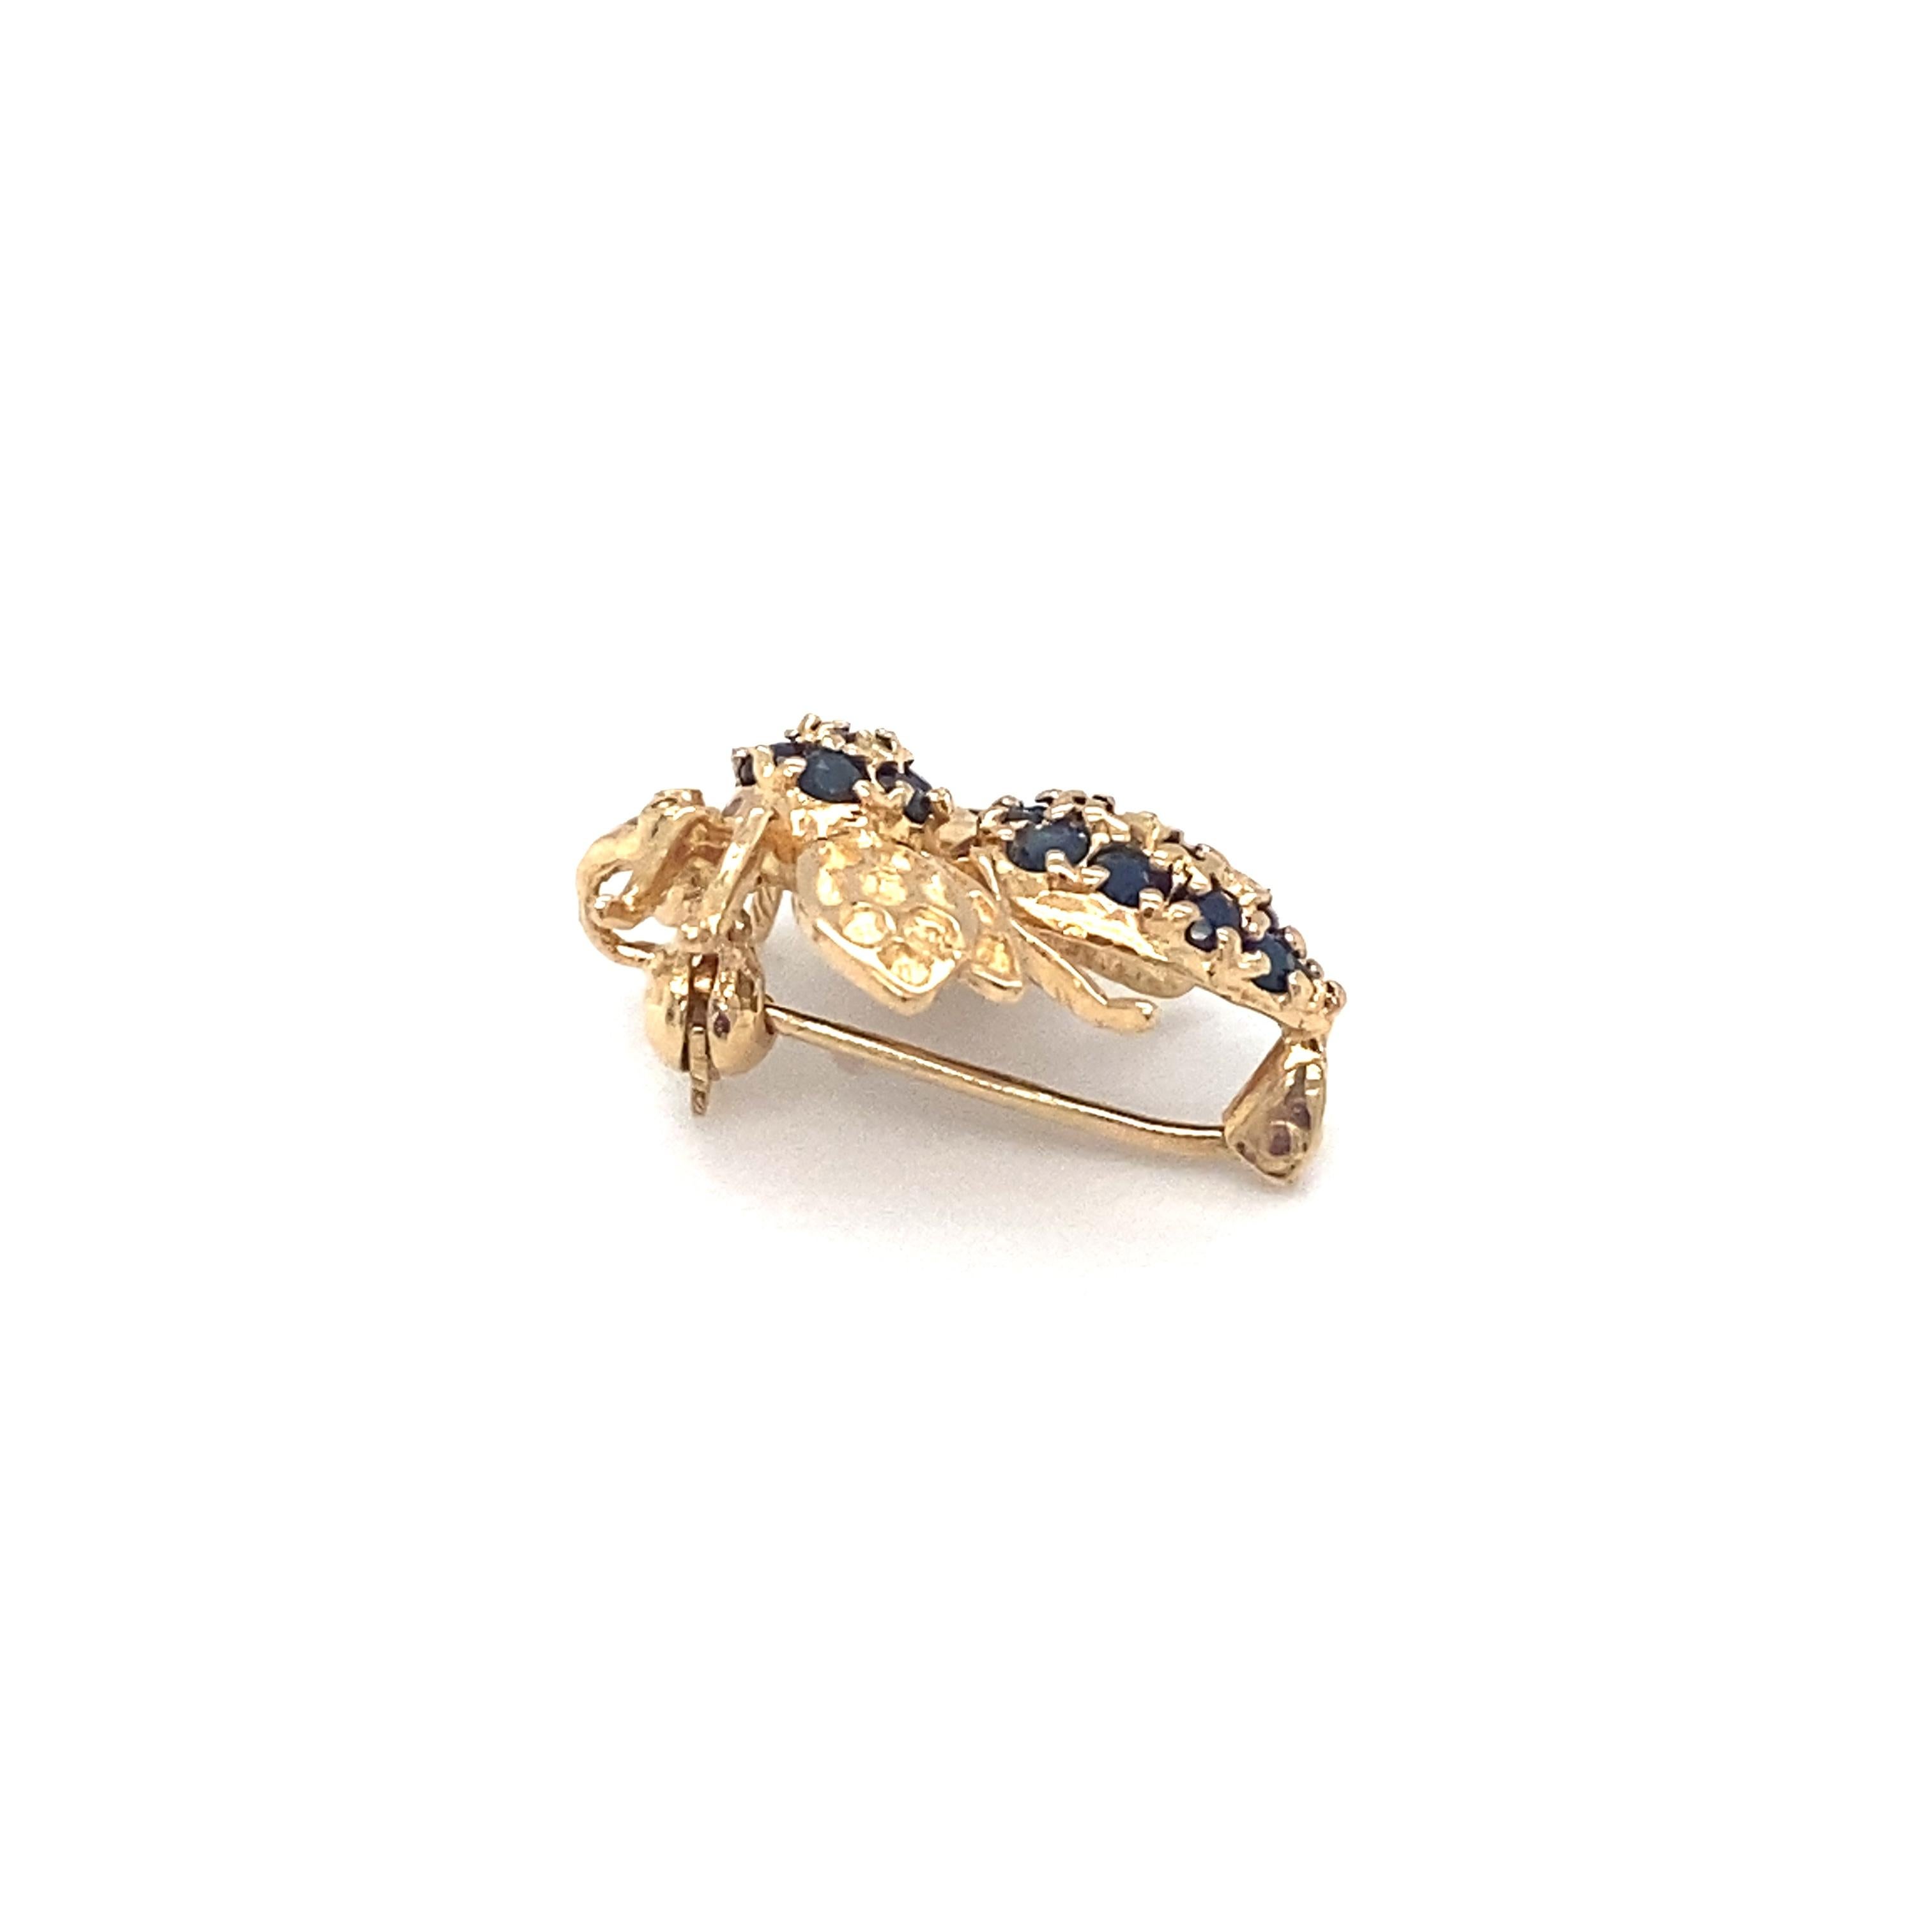 Circa: 1950s
Metal Type: 14 Karat Yellow Gold
Weight: 2.3 grams
Dimensions: approximately 0.75 inch  x 0.75 inch 

Sapphires:
All natural
Round Brilliant 
Deep Blue 
